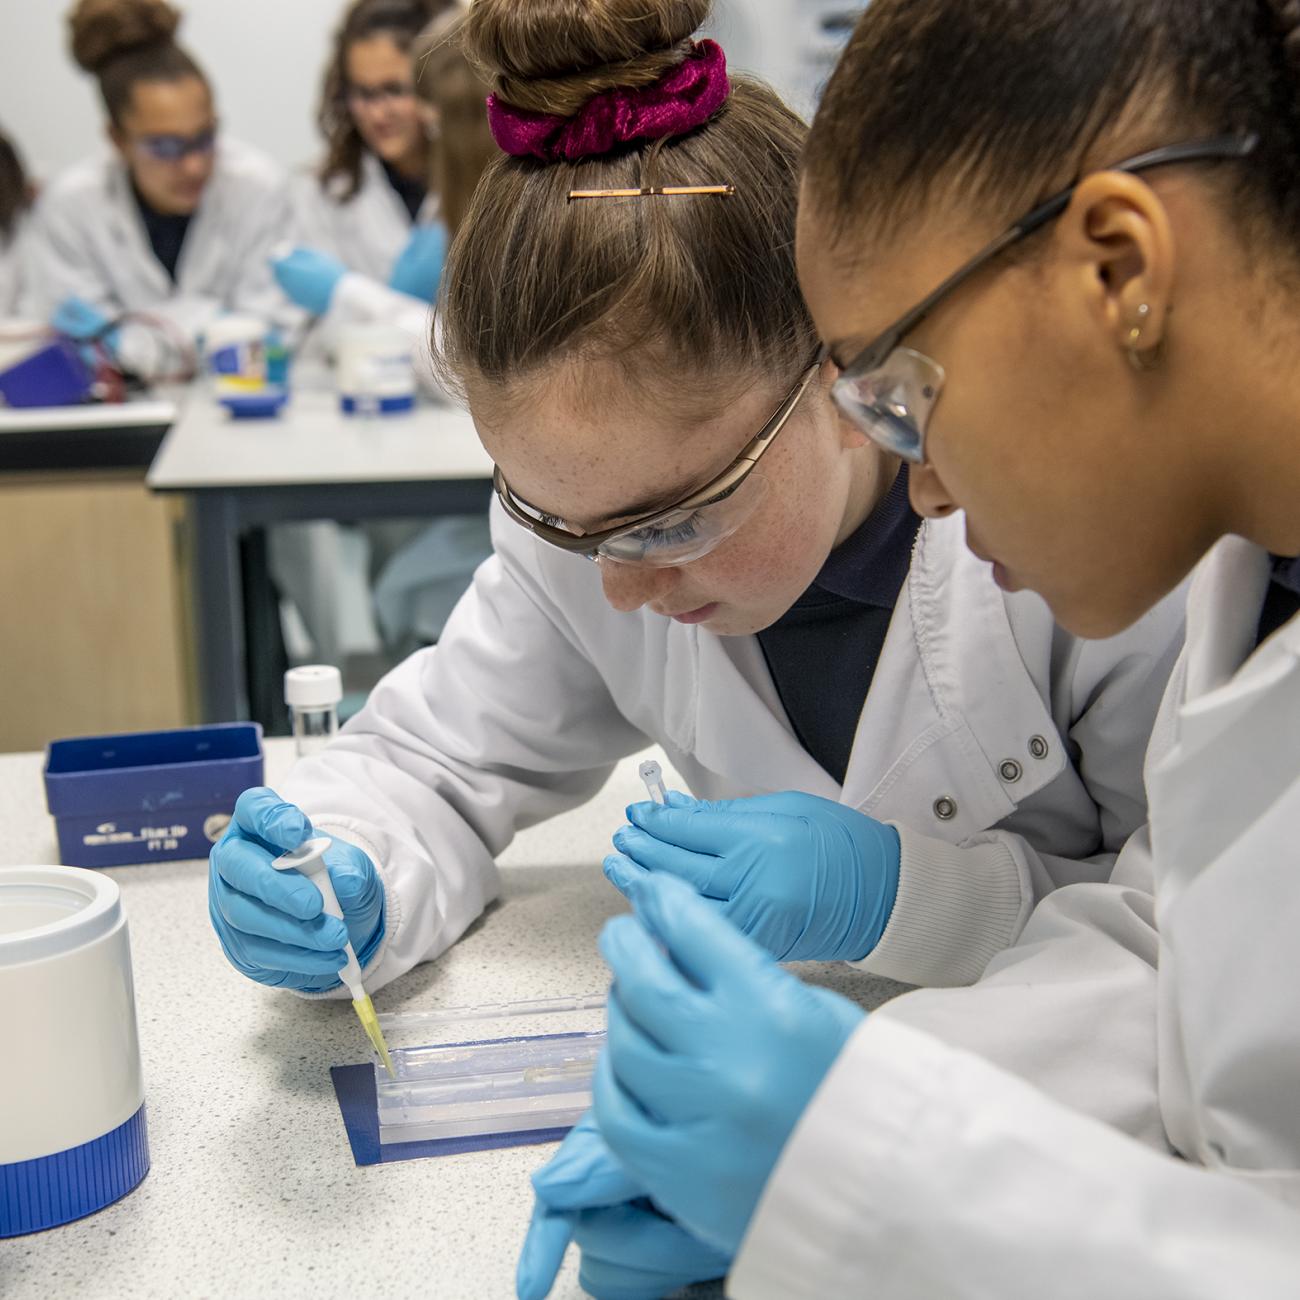 School pupils wearing goggles and gloves experimenting in lab